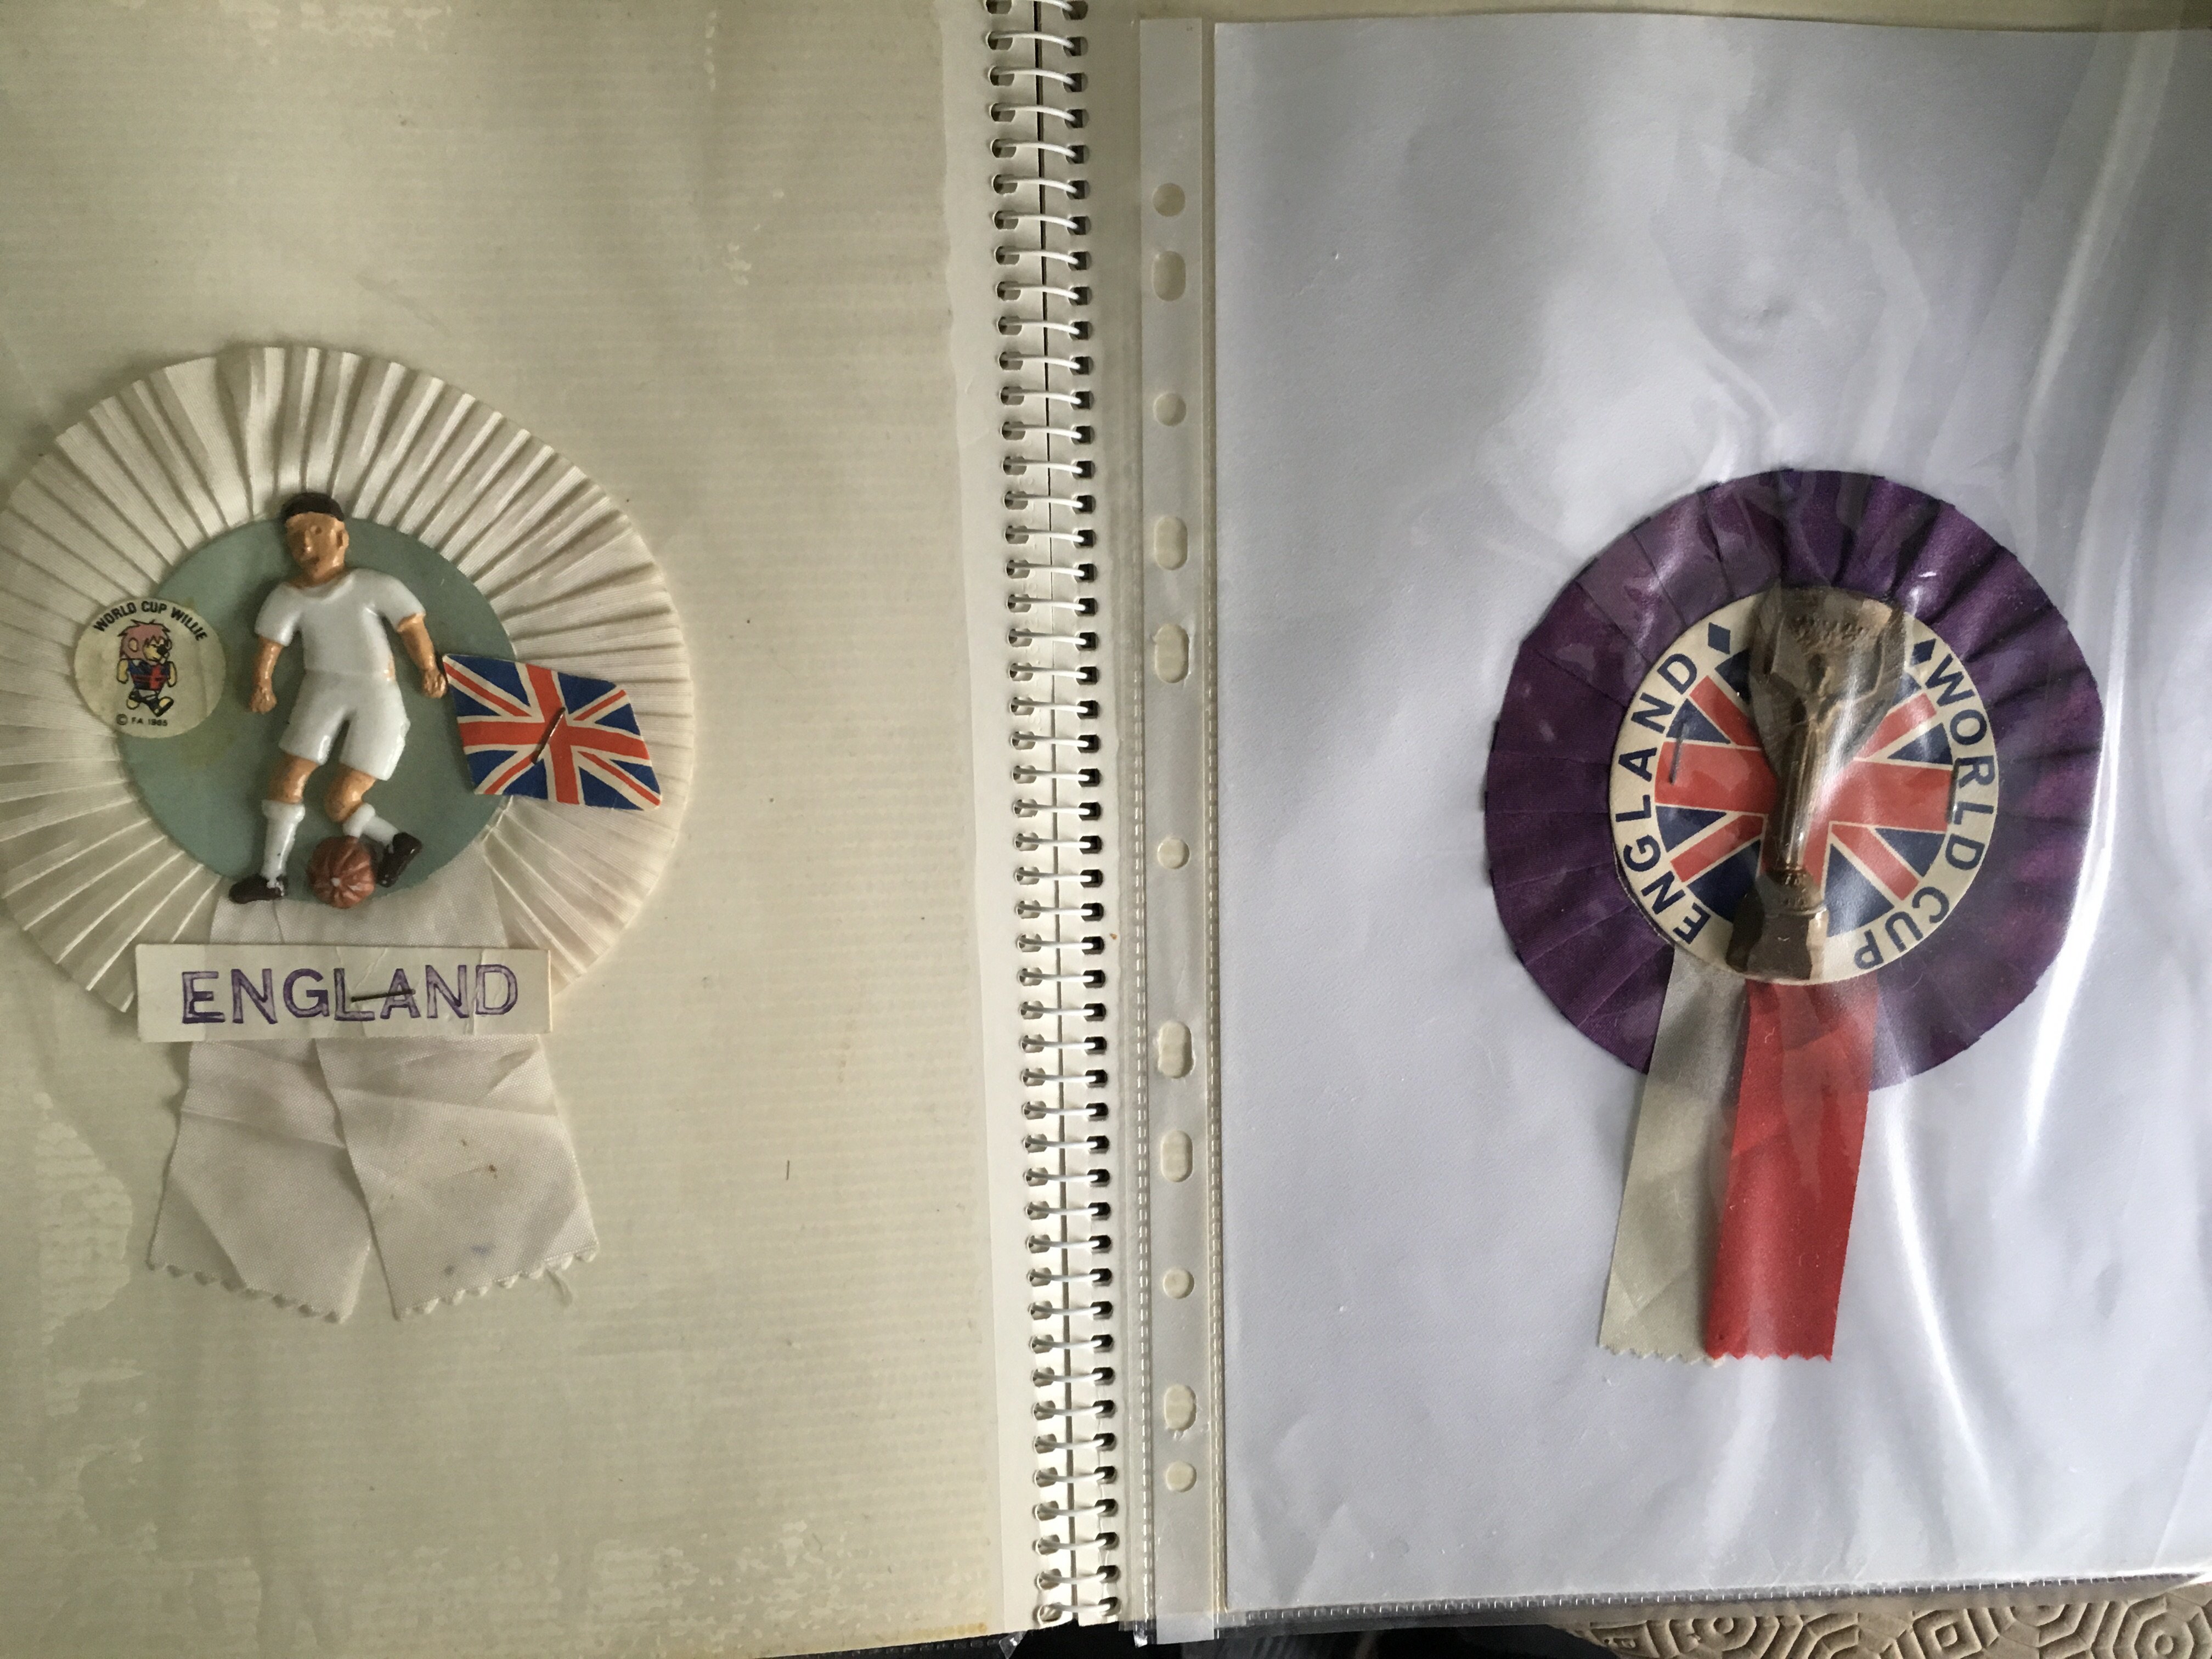 1966 England World Cup Rosette Collection: Original and all different housed in collectors folder. - Image 3 of 3